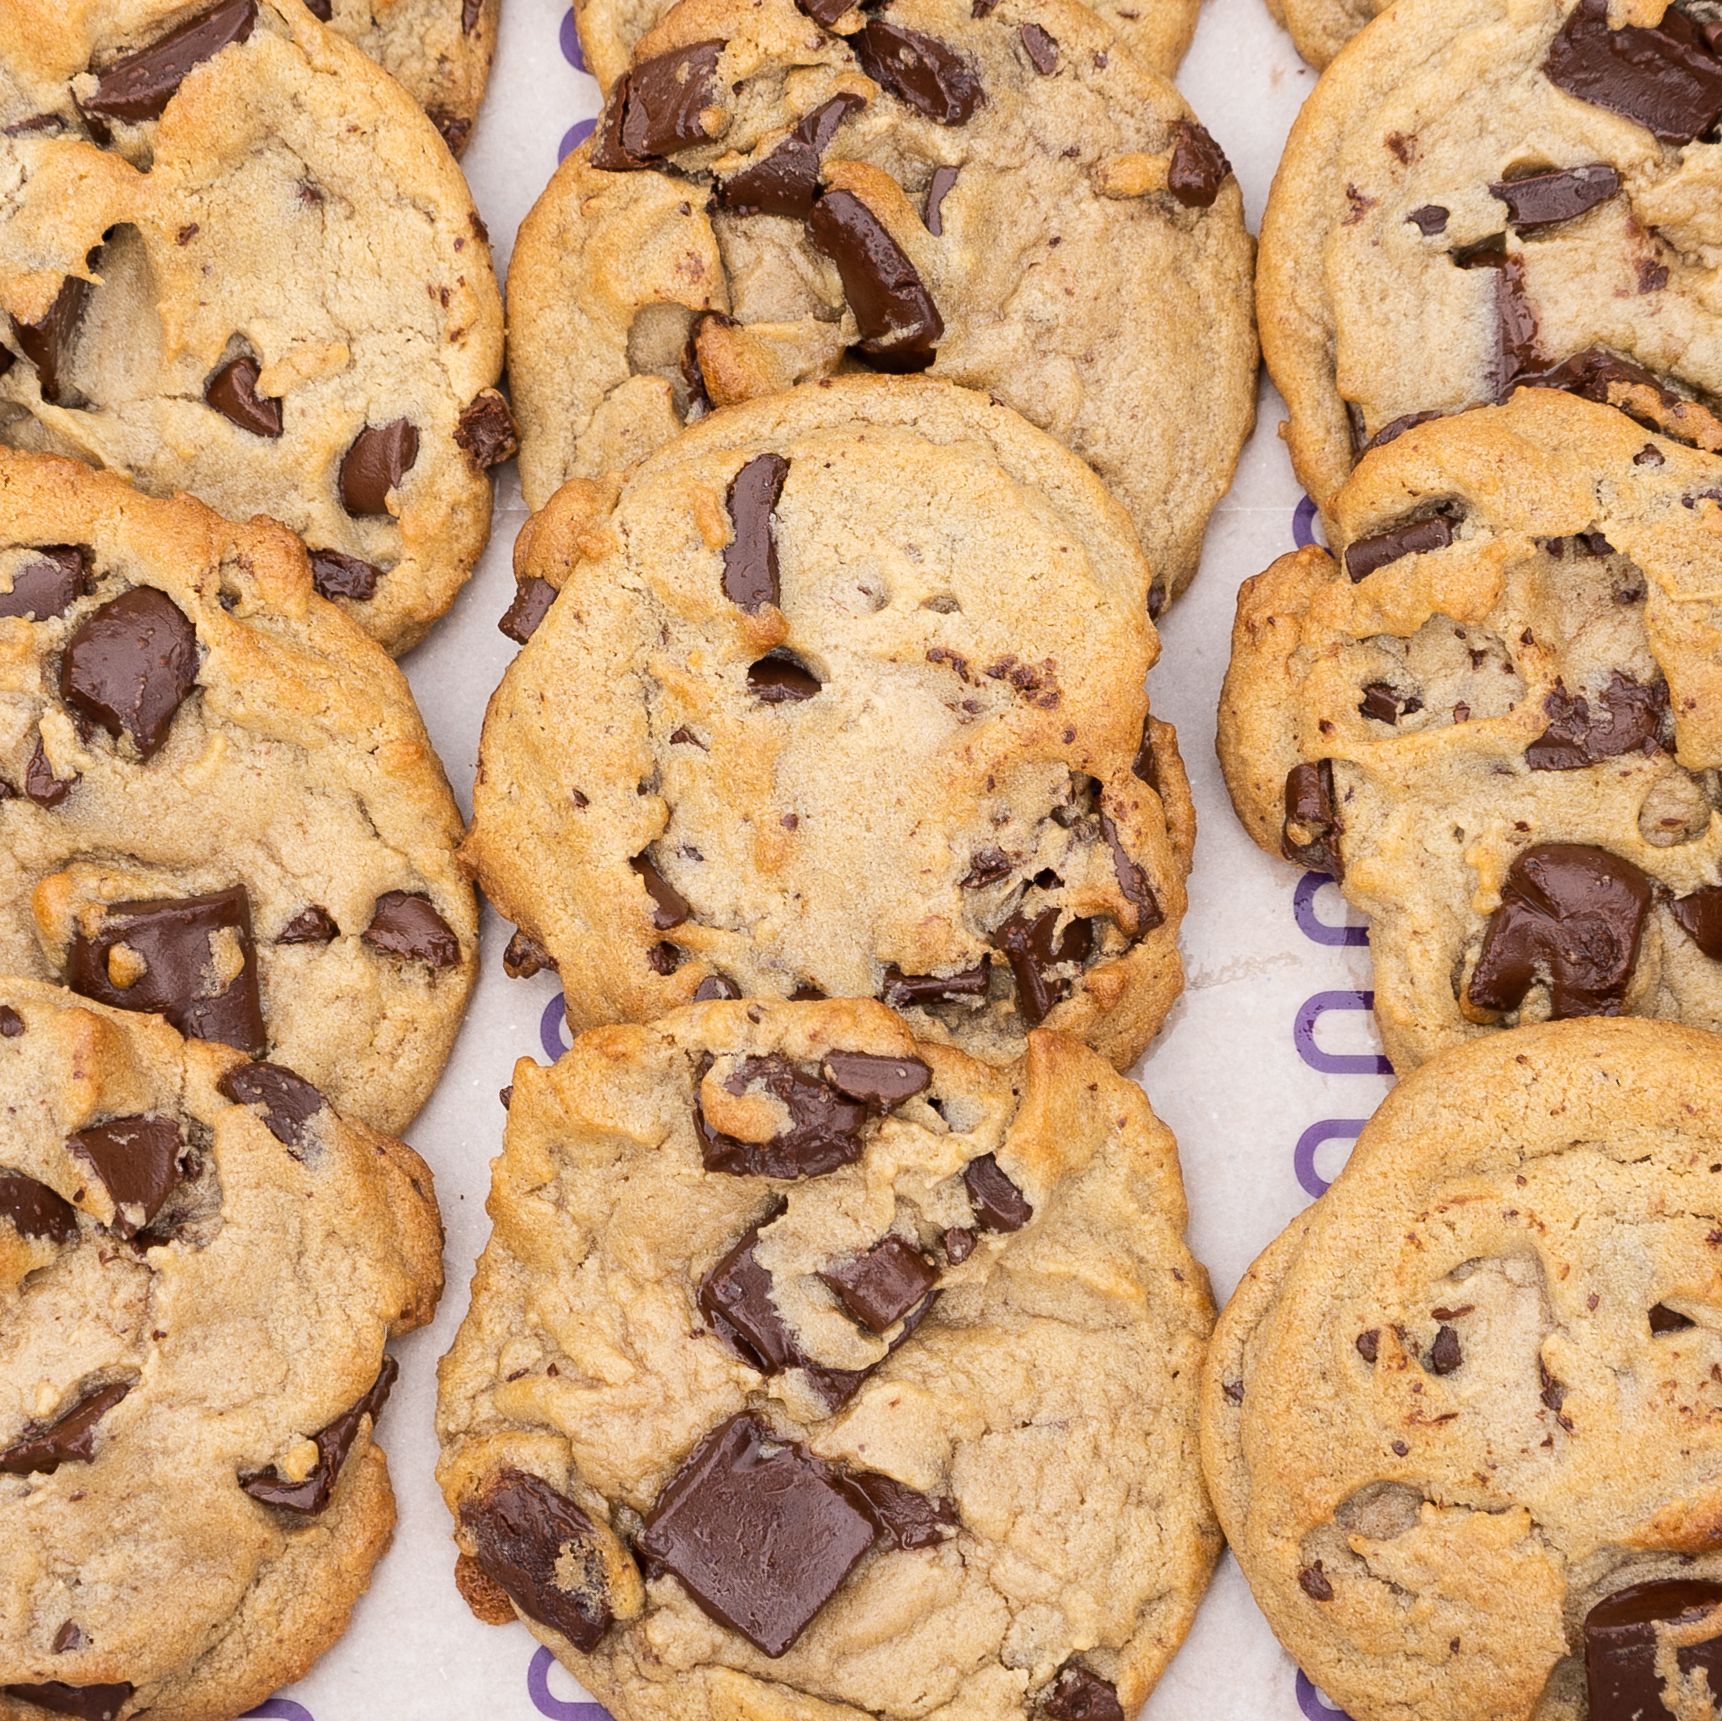 Insomnia Cookies Free Choc Chunk Cookie W Purchase For Natl Choc Chip Cookie Day Even Tho We Re Firm Believers In Choc Chunks Choc Chips We Re Still Gonna Give Ya